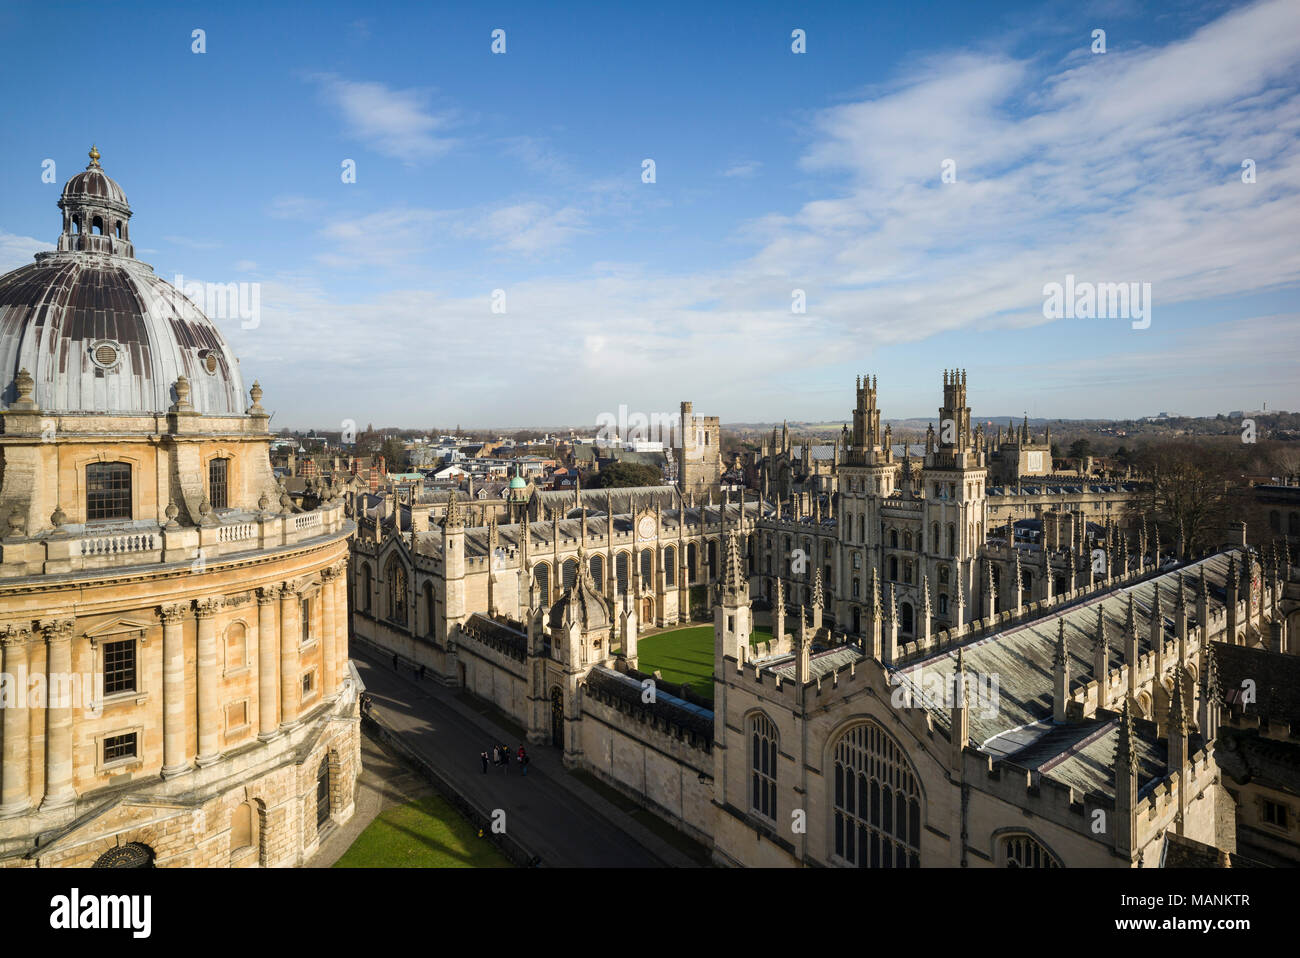 Oxford. England. View of Radcliffe Camera, Radcliffe Square with All Souls College.  Designed by James Gibbs, built 1737–49 to house the Radcliffe Sci Stock Photo